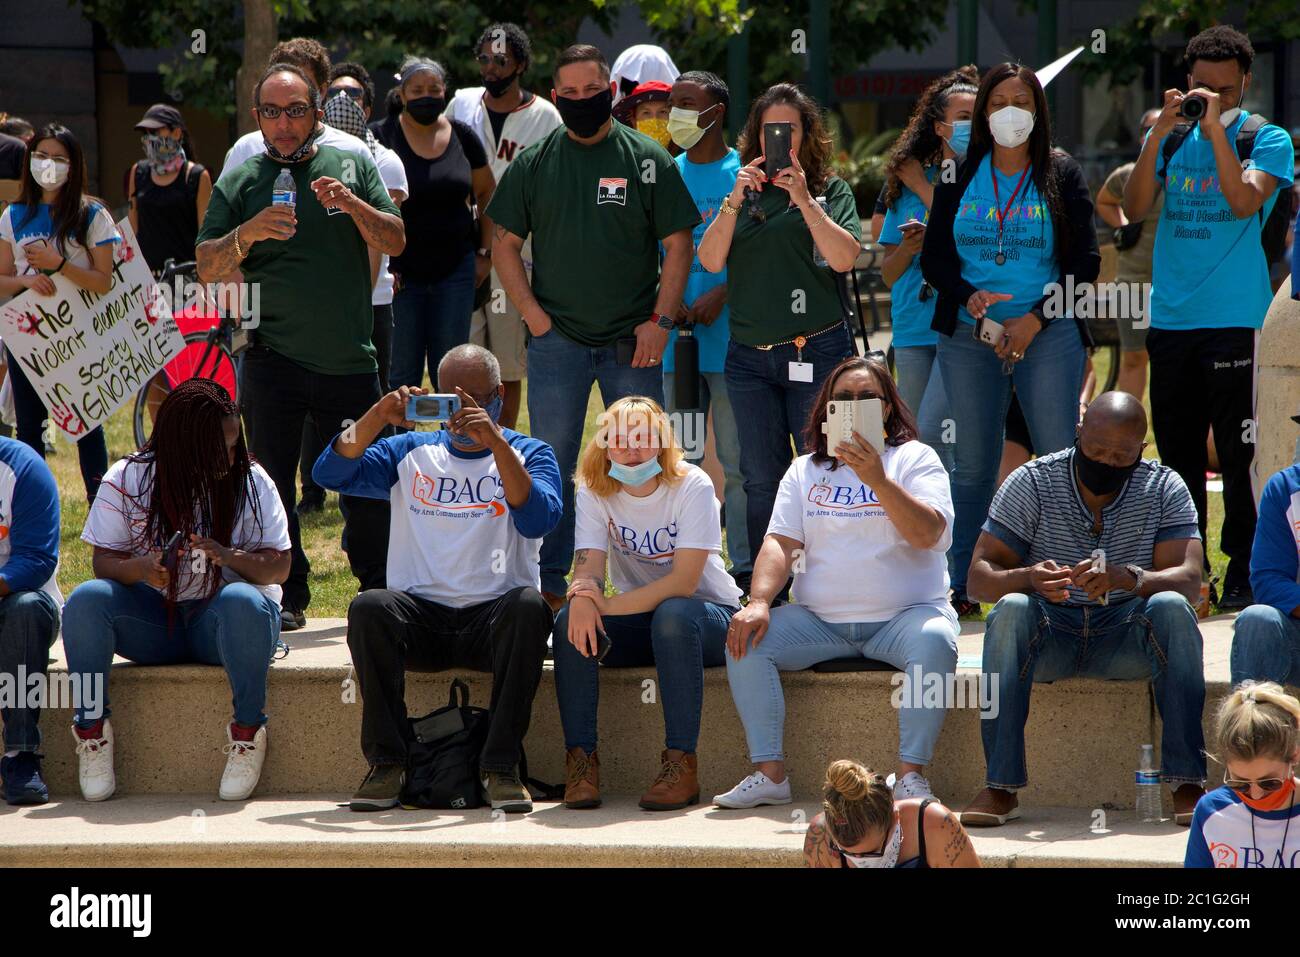 Oakland, CA - June 10, 2020: Protestors participating in  the George Floyd Black Lives Matter protest in Oakland, Rally at City Hall on 14th and Broad Stock Photo